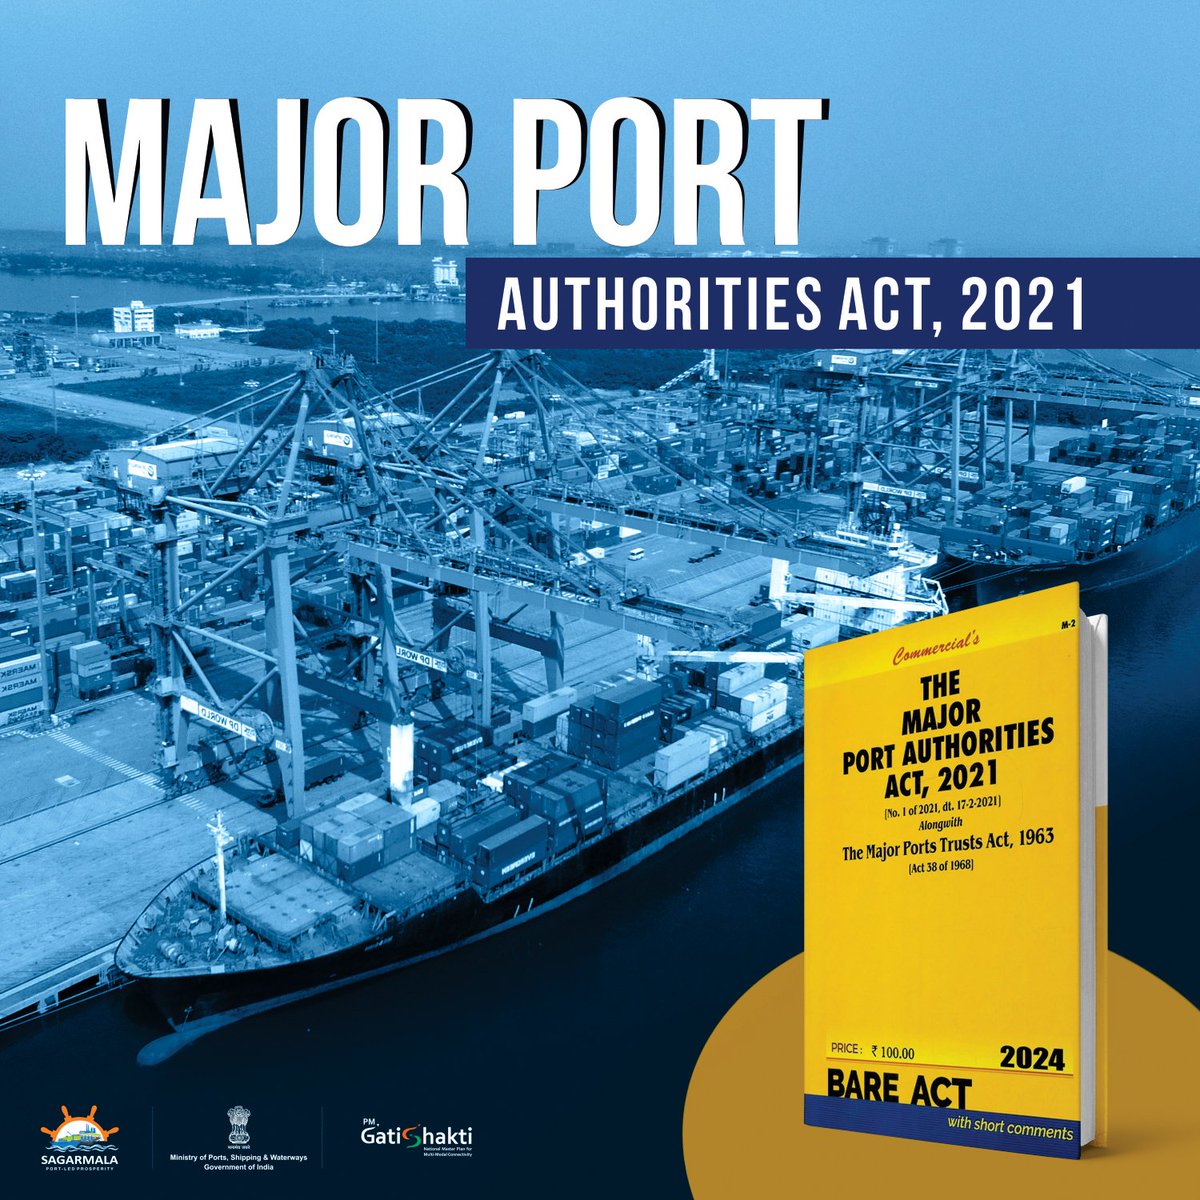 MPA 2021 marked a significant milestone in promoting the development of ports in the country. The decentralization of decision-making, infusion of professionalism, and inclusion of PPP models has enhanced efficiency and empowered the governance of major ports. @LiveLawIndia